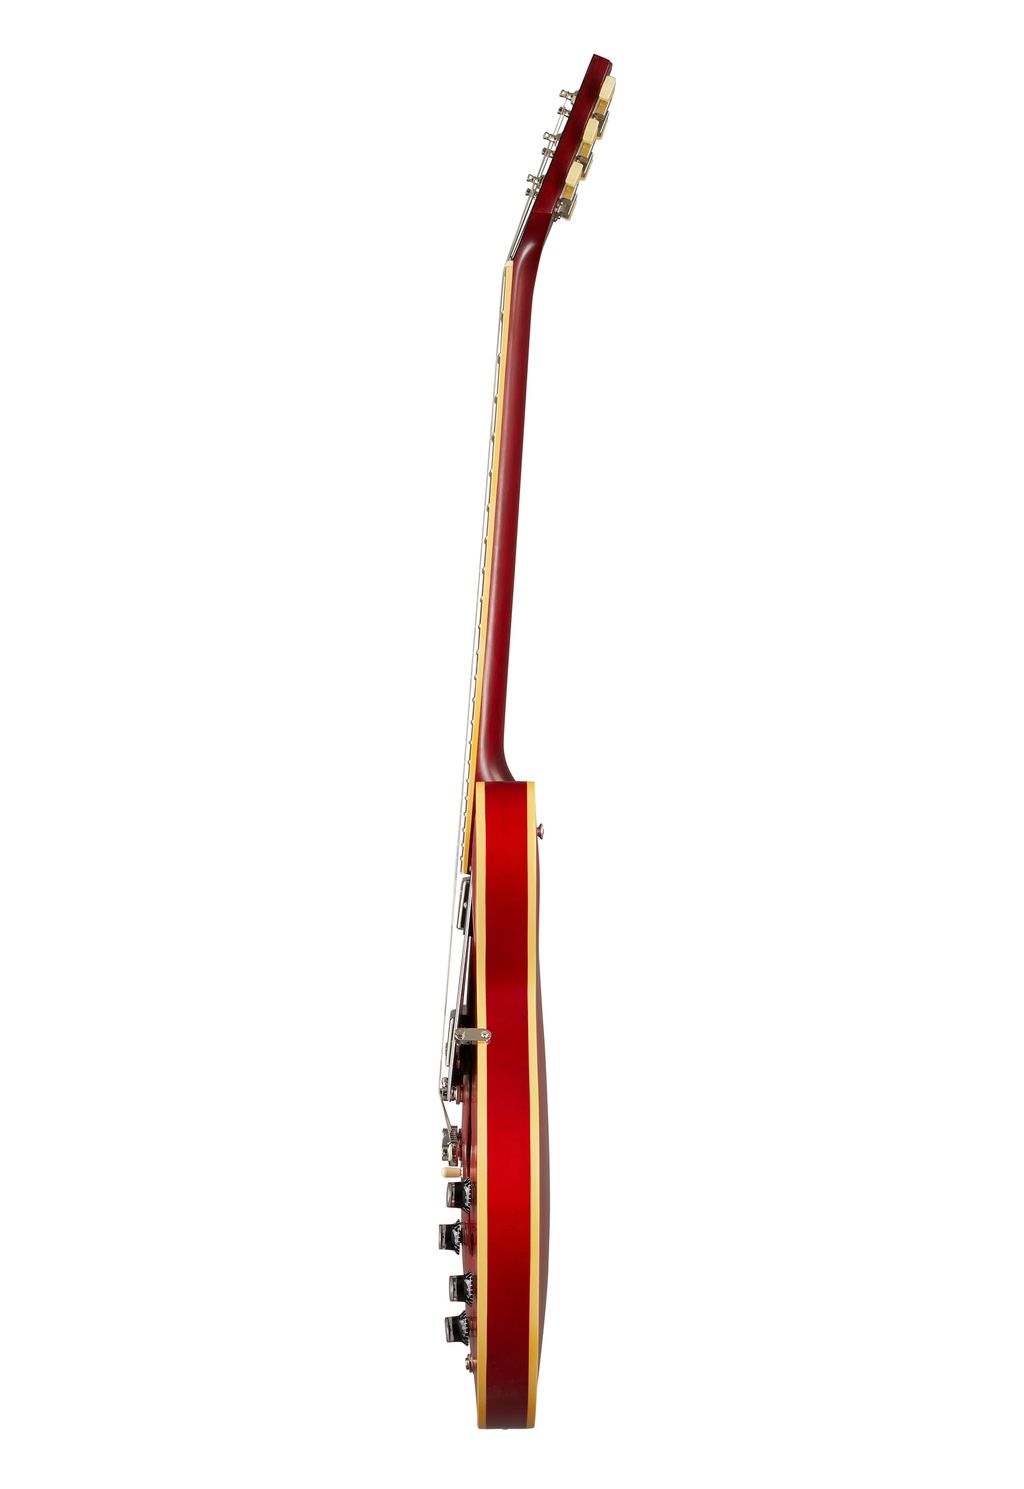 __static.gibson.com_product-images_USA_USA8JR46_Satin_Cherry_ES35S00WCNH1_side